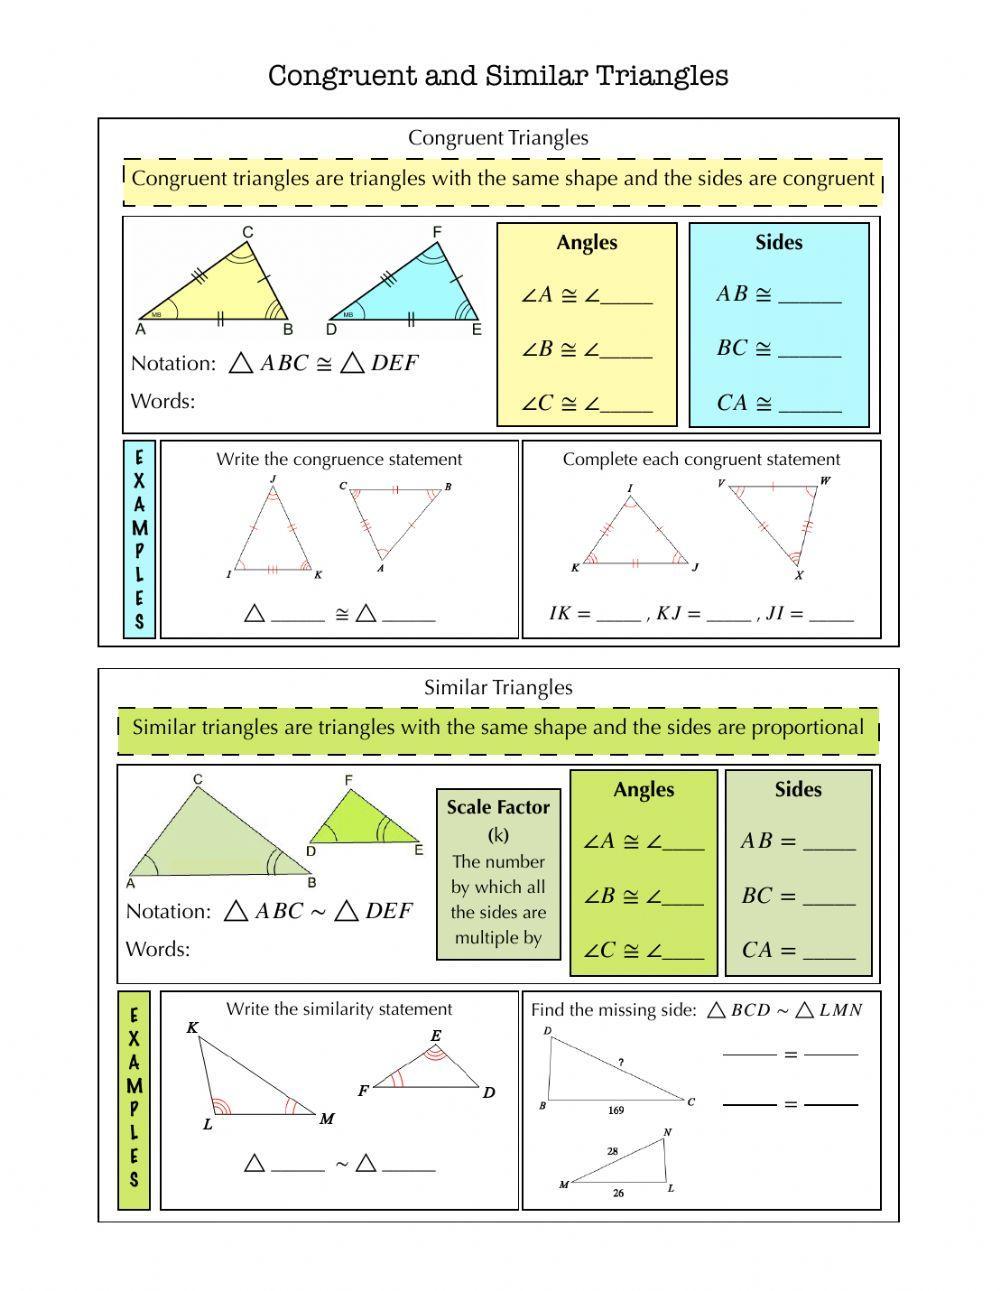 Congruent and Similar Triangles Notes